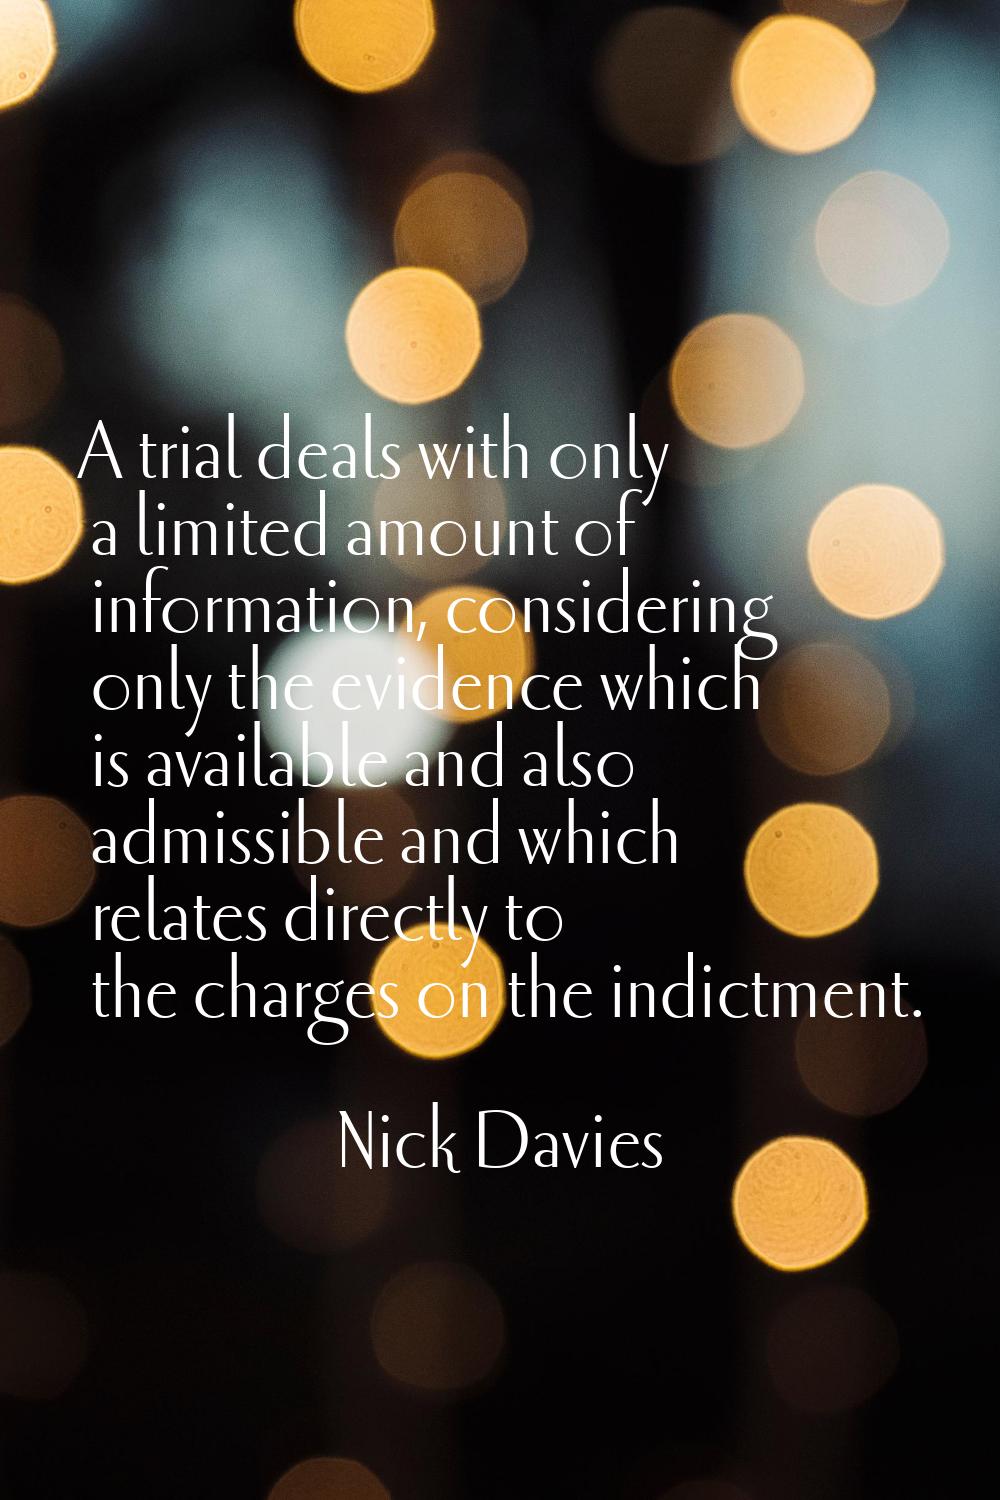 A trial deals with only a limited amount of information, considering only the evidence which is ava